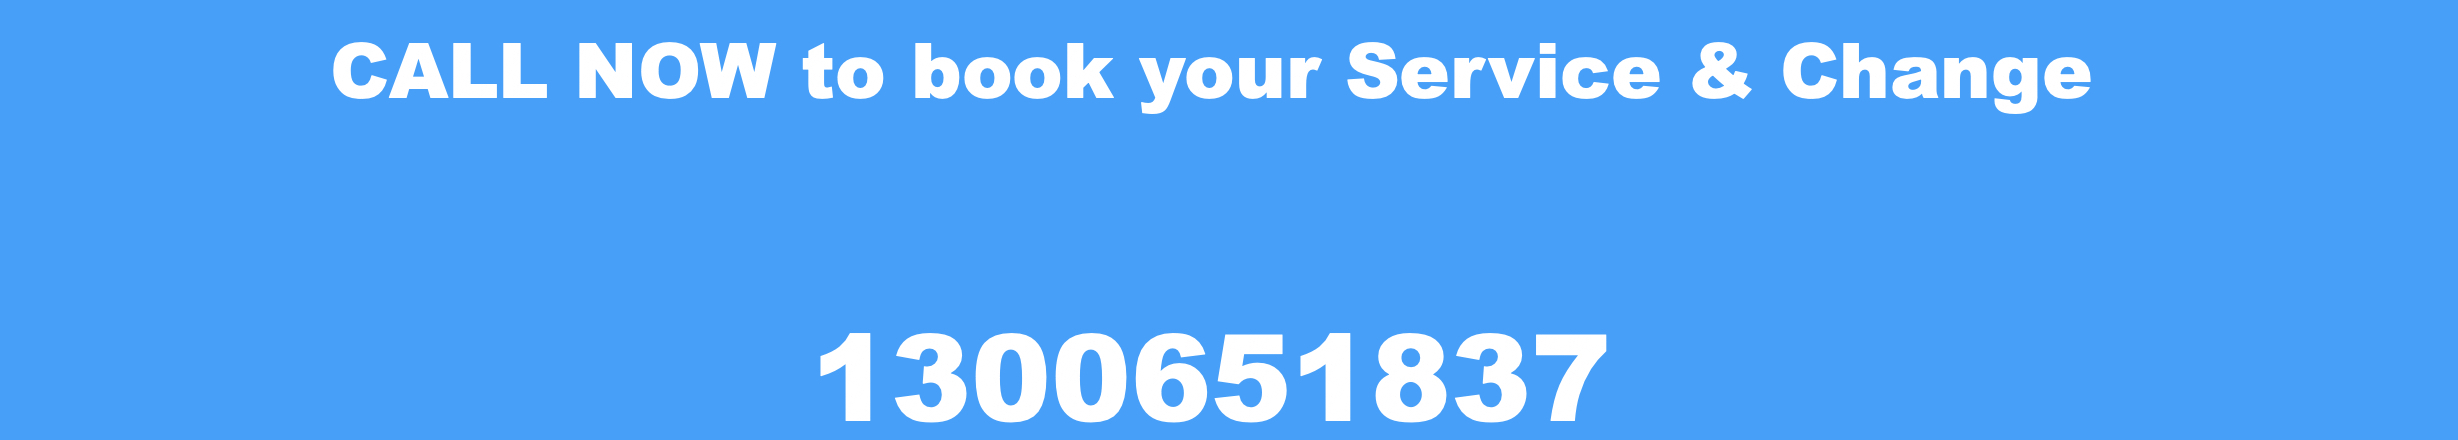 service-page-call-now-for-service.jpg